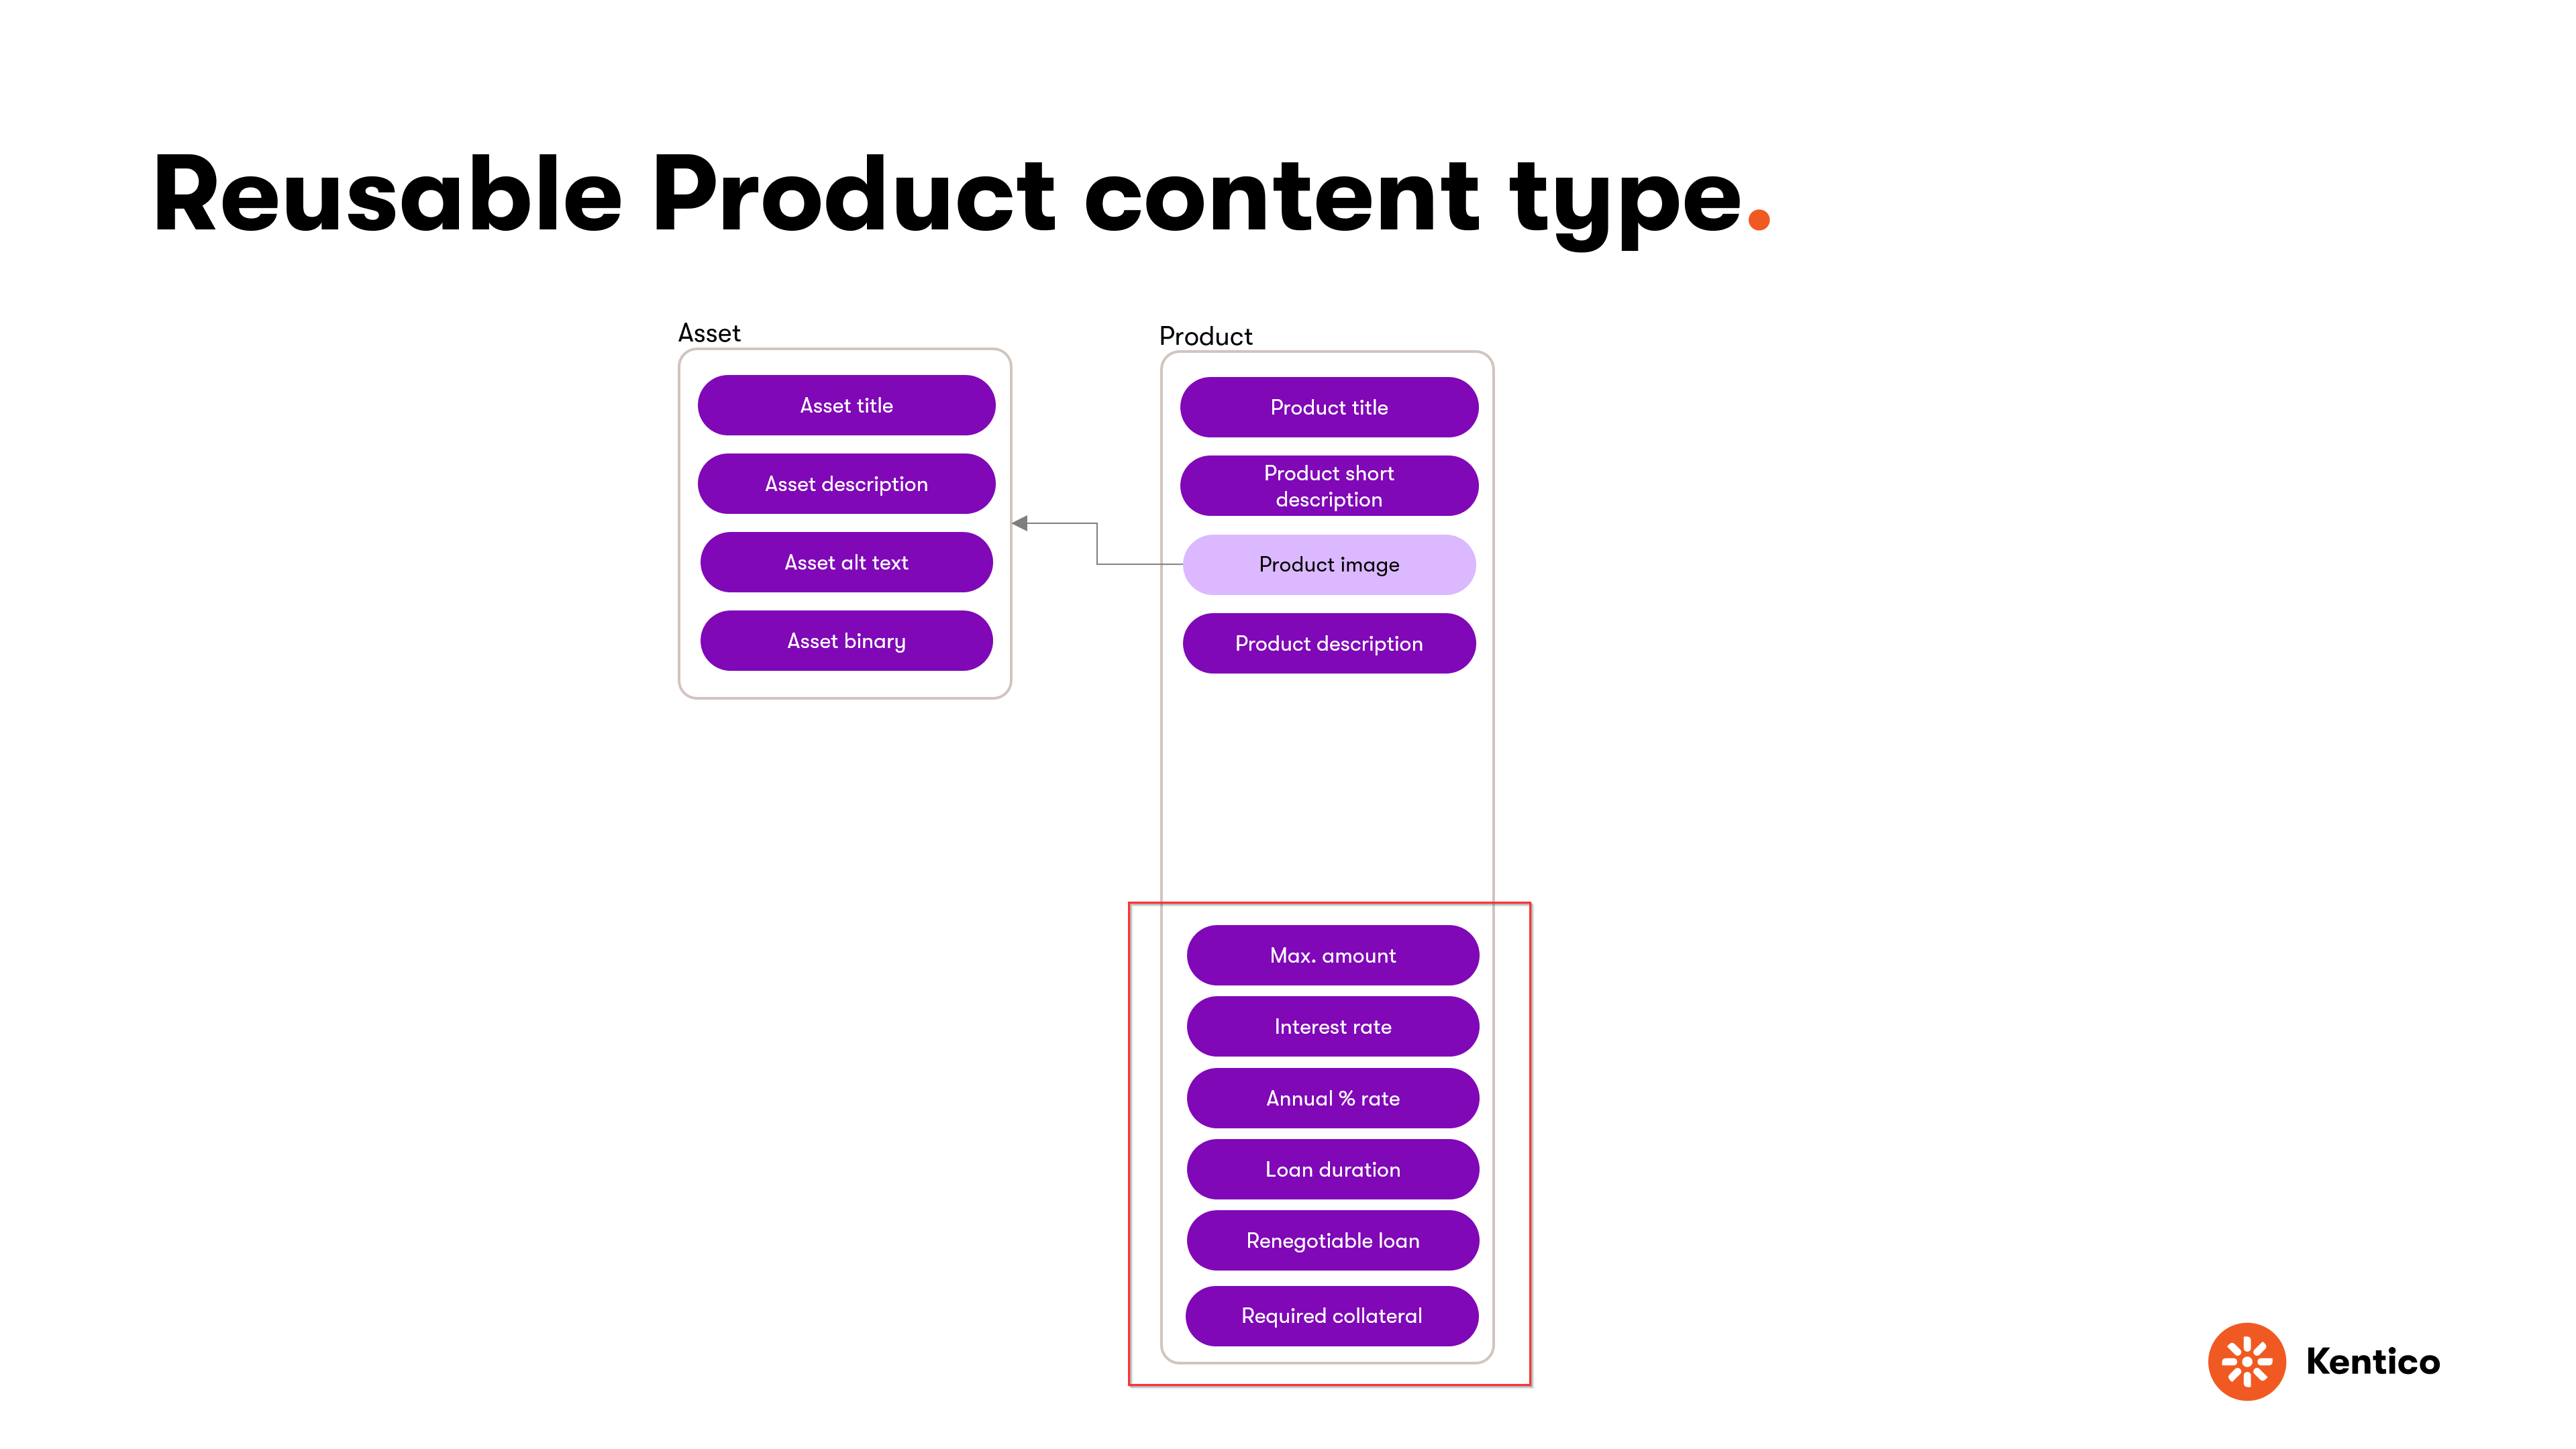 Product content type graph showing financial product fields